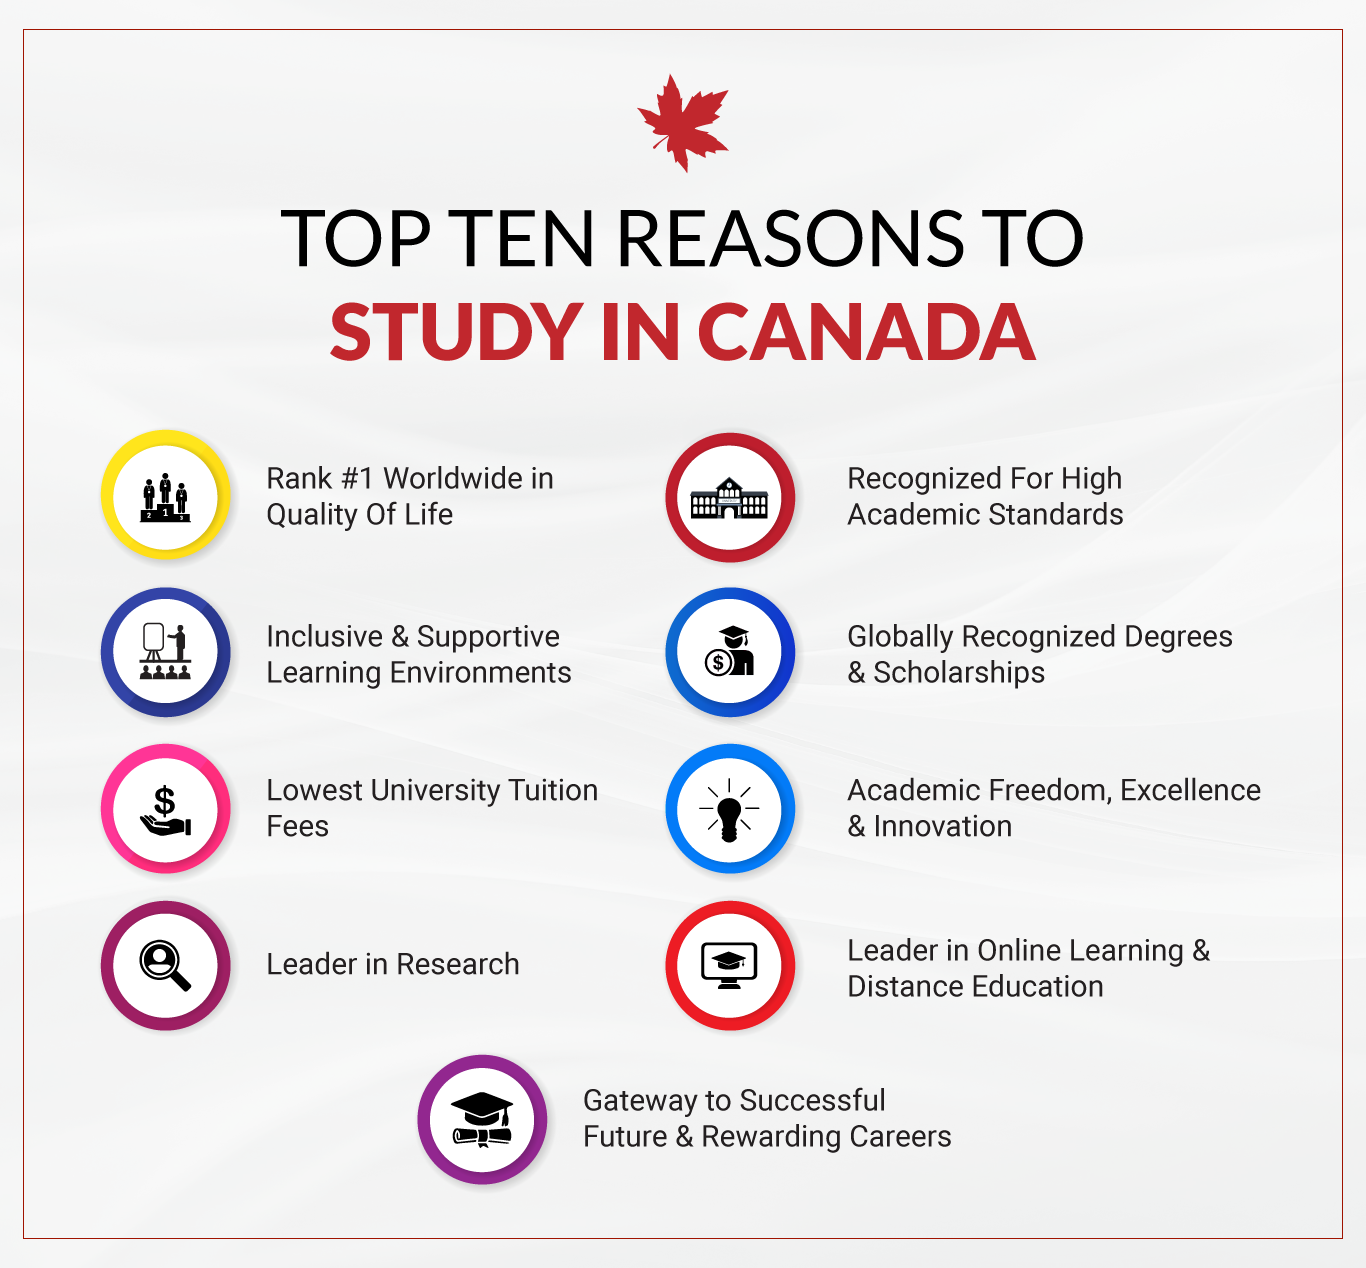 TOP TEN REASONS TO STUDY IN CANADA